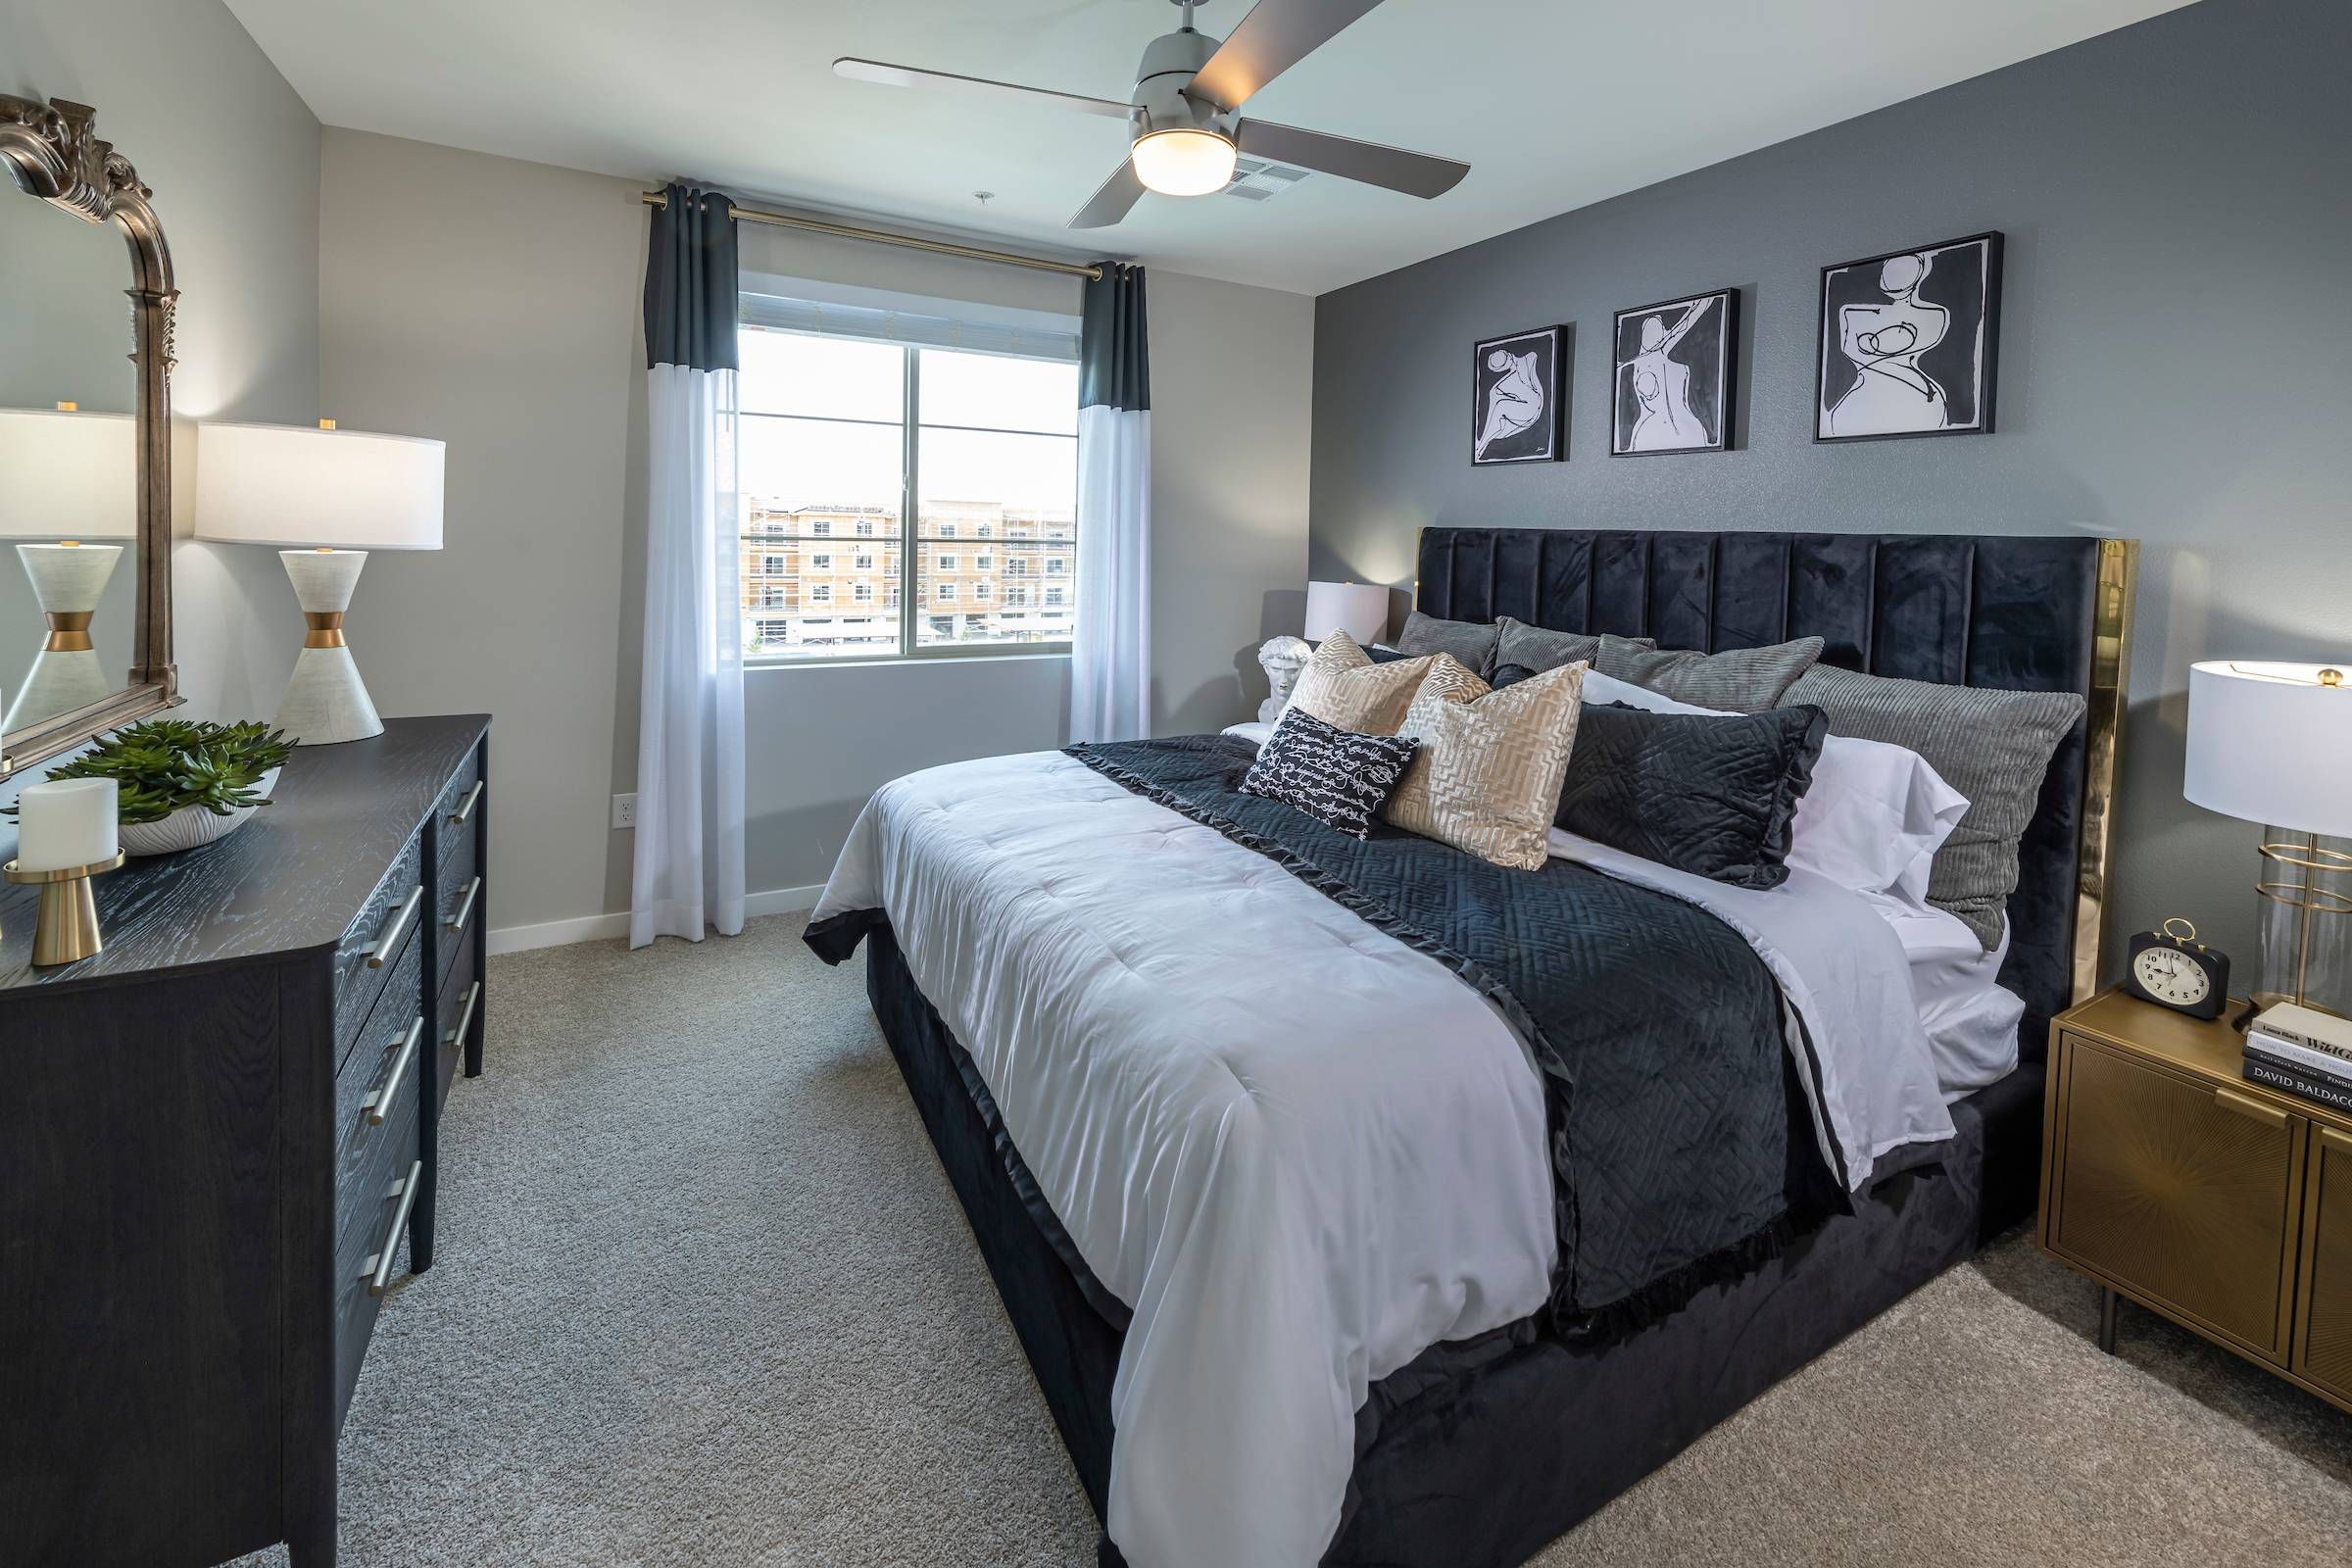 Alta Southern Highlands offers a bedroom with a luxurious black bed, matching dressers, and elegant wall art.